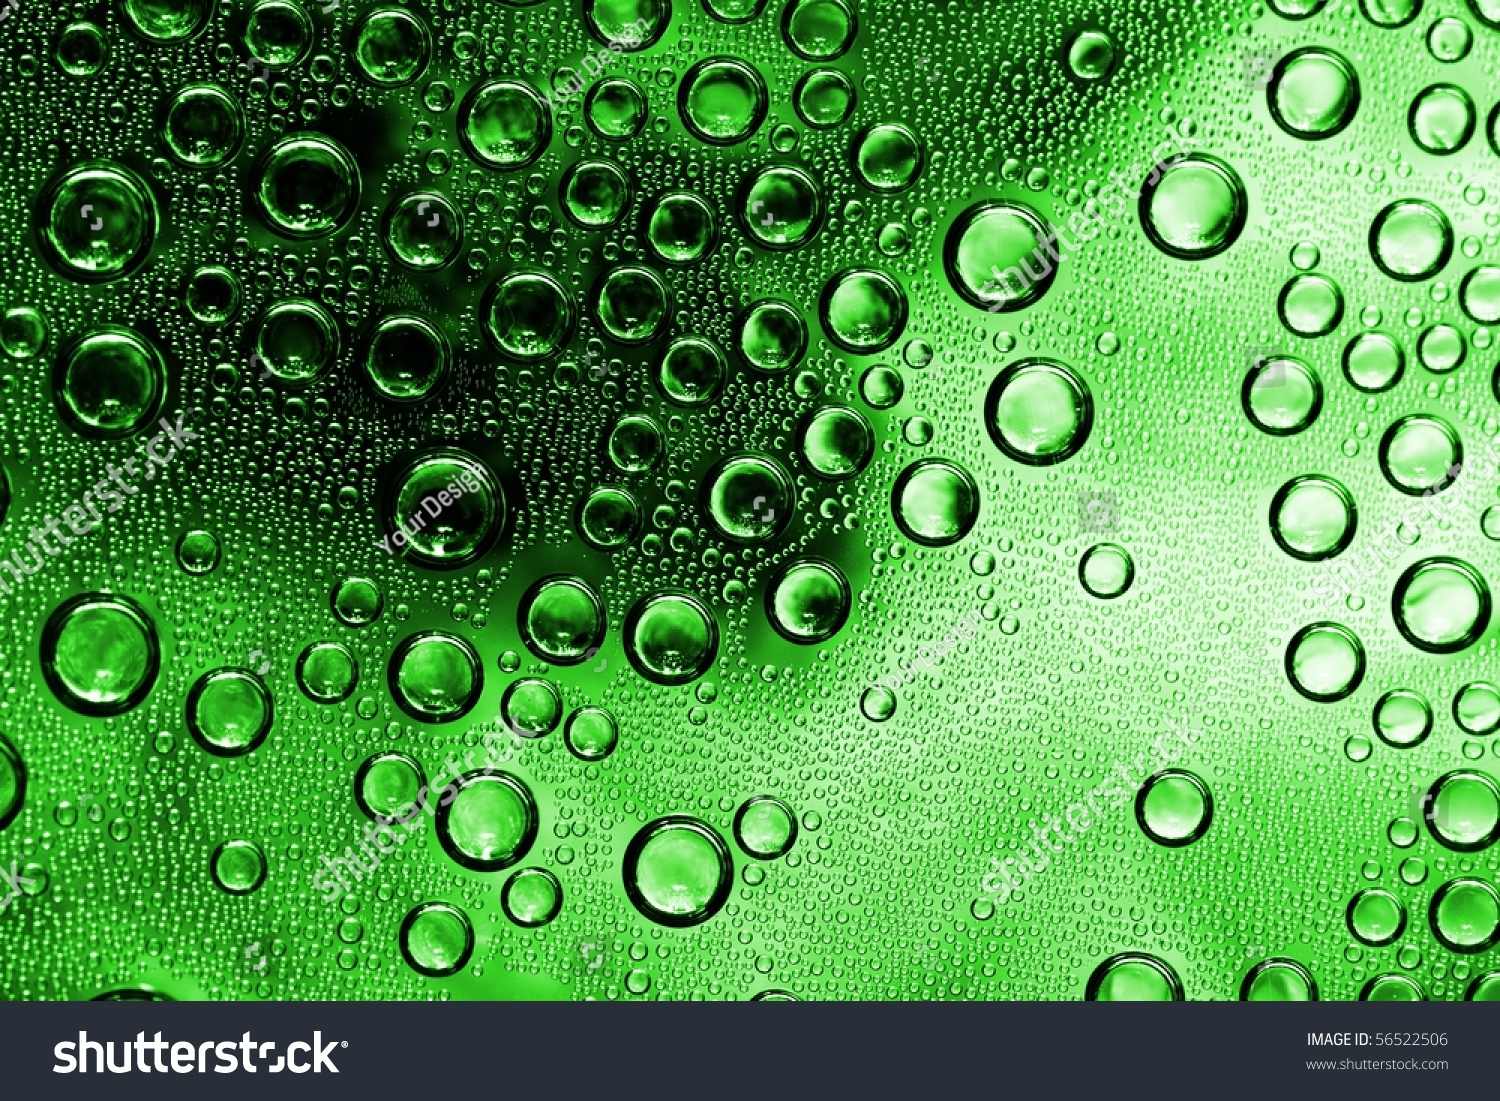 Green Bubble Texture Background Stock Photo 56522506 - Shutterstock